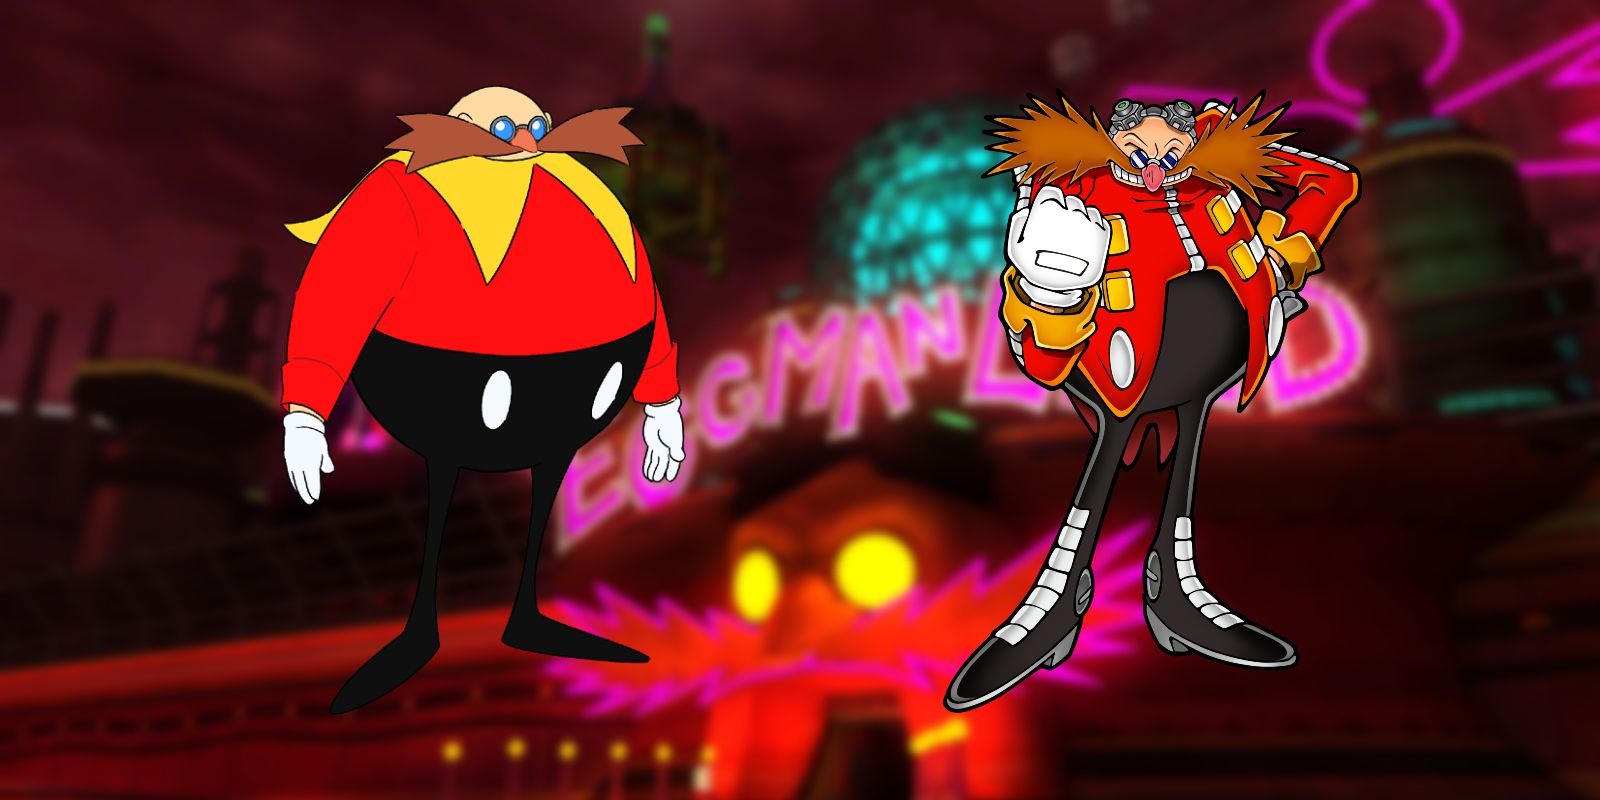 uhh? OK? does Sega or Dr. Eggman have a fascination with sonics